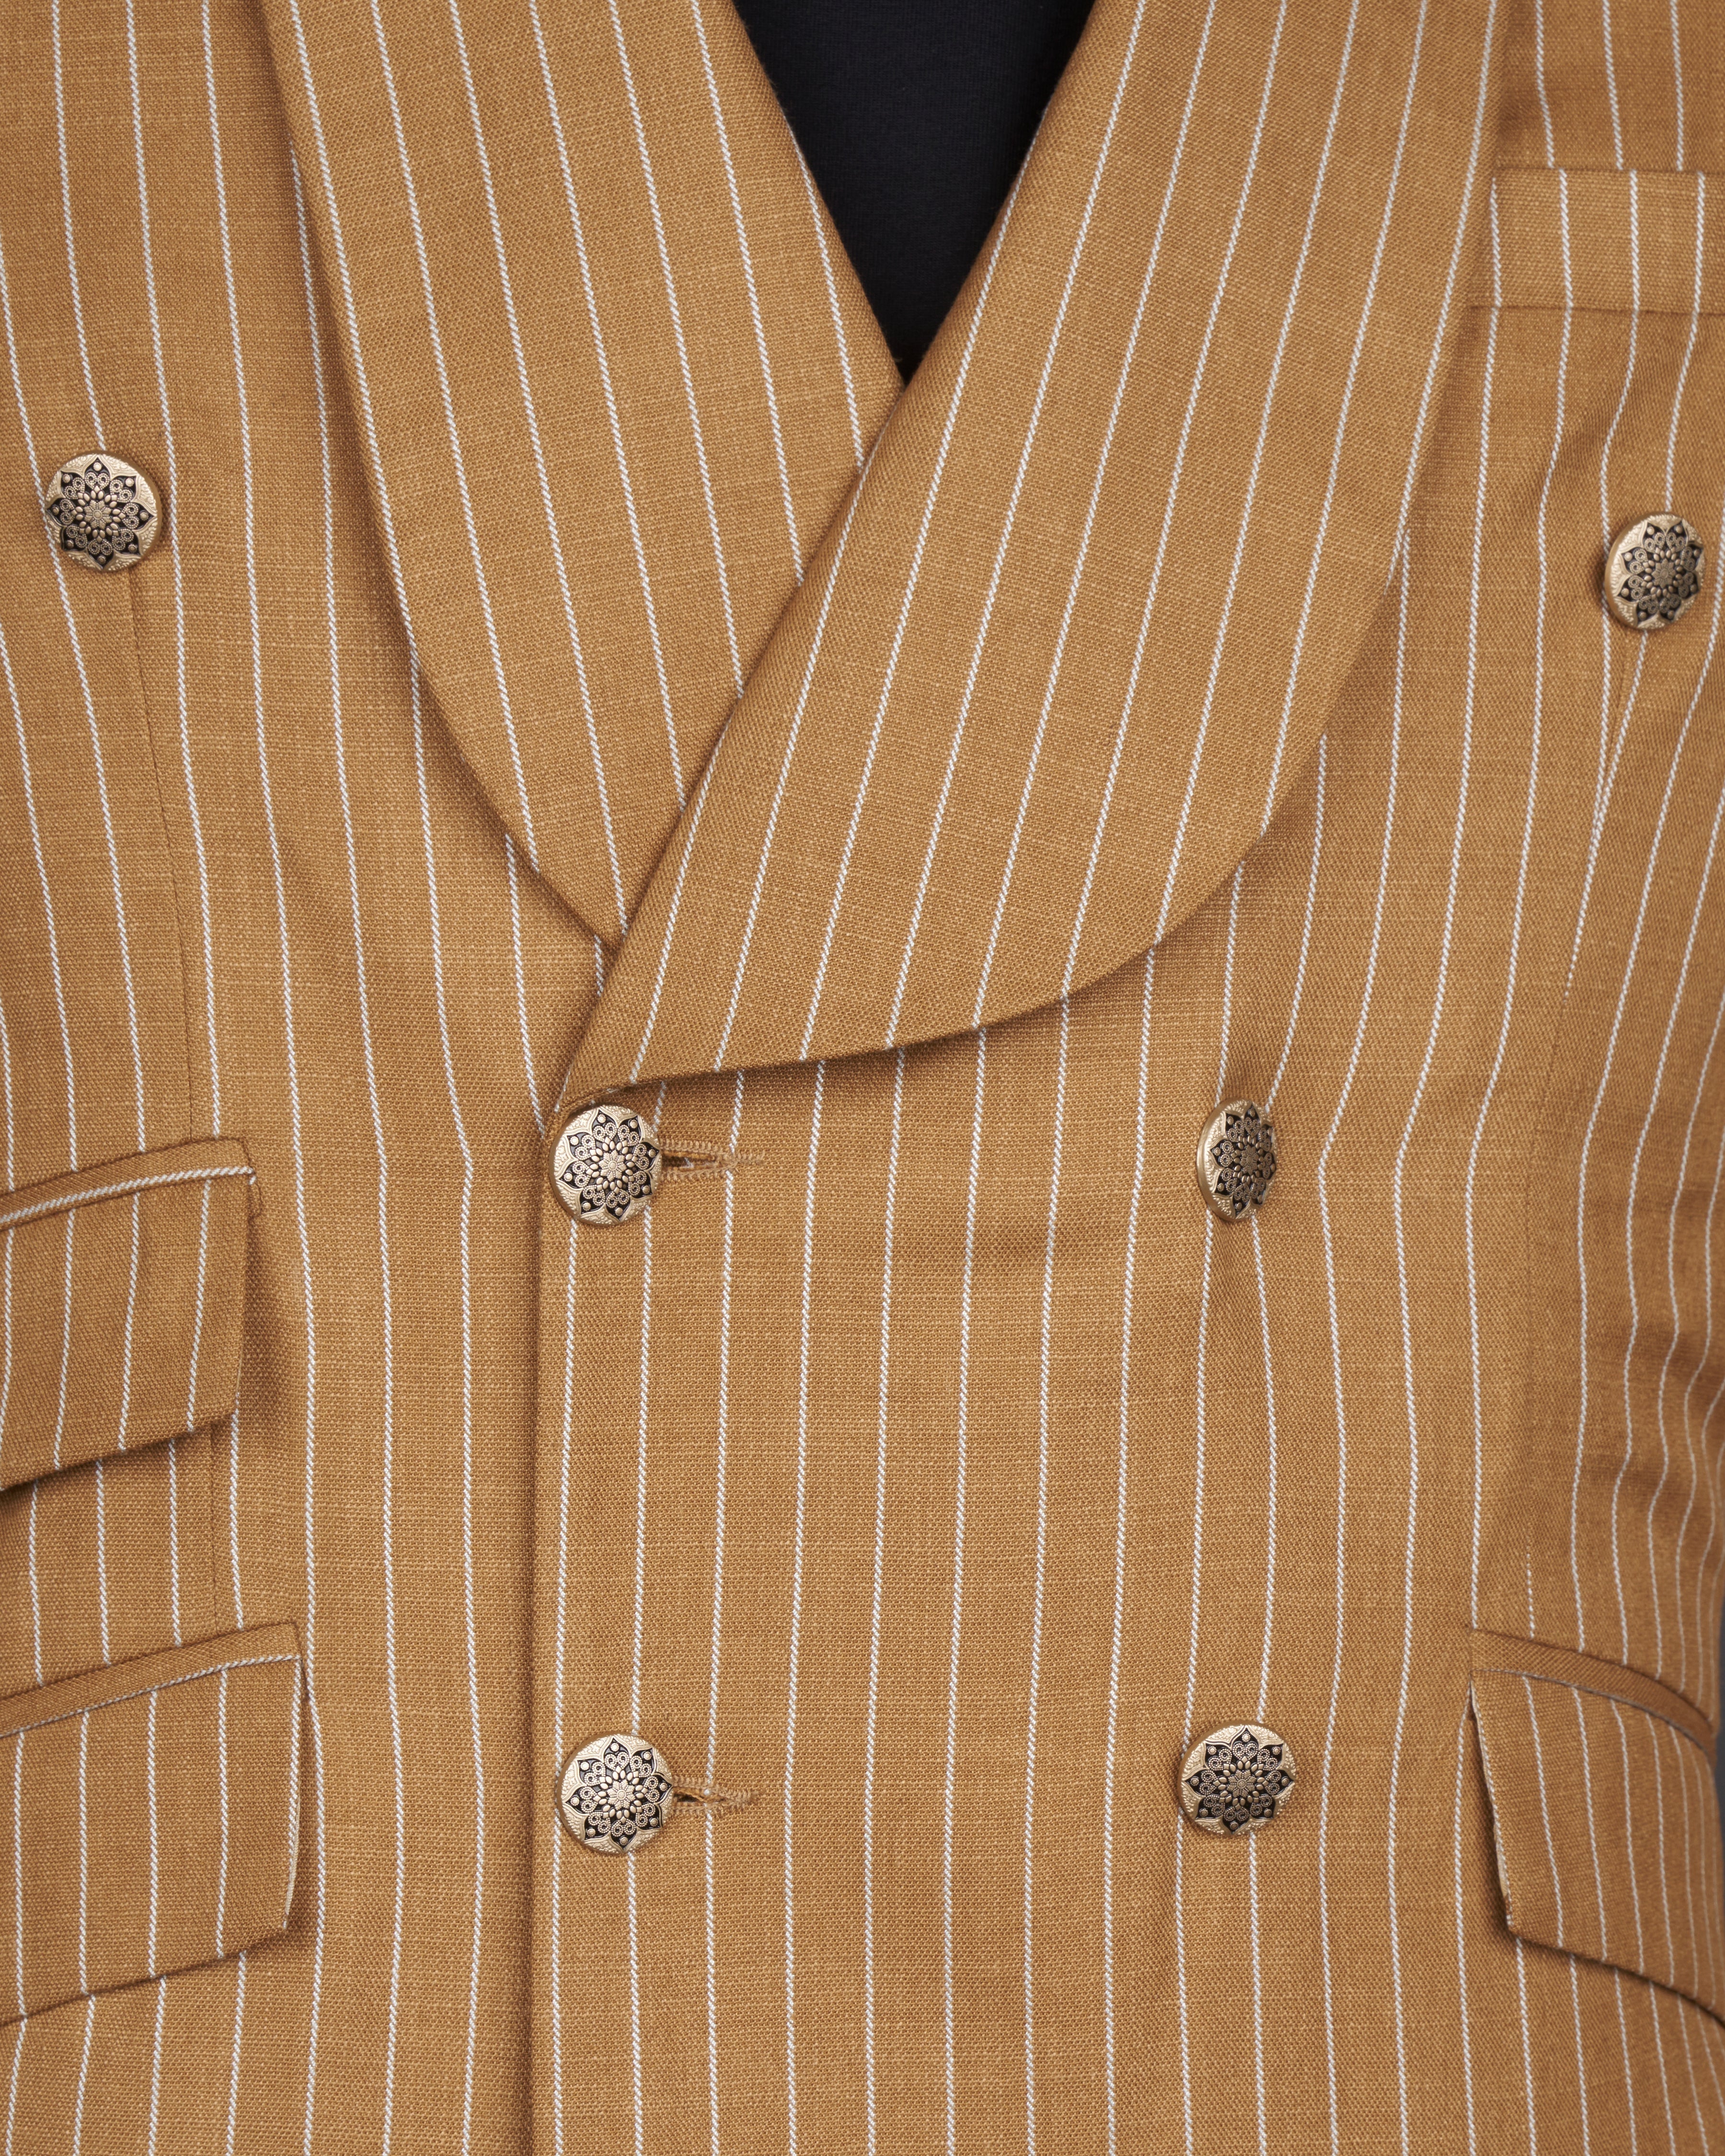 Clay Brown with White Striped Double Breasted Designer Blazer BL2615-DB-GB-D270-36, BL2615-DB-GB-D270-38, BL2615-DB-GB-D270-40, BL2615-DB-GB-D270-42, BL2615-DB-GB-D270-44, BL2615-DB-GB-D270-46, BL2615-DB-GB-D270-48, BL2615-DB-GB-D270-50, BL2615-DB-GB-D270-52, BL2615-DB-GB-D270-54, BL2615-DB-GB-D270-56, BL2615-DB-GB-D270-58, BL2615-DB-GB-D270-60